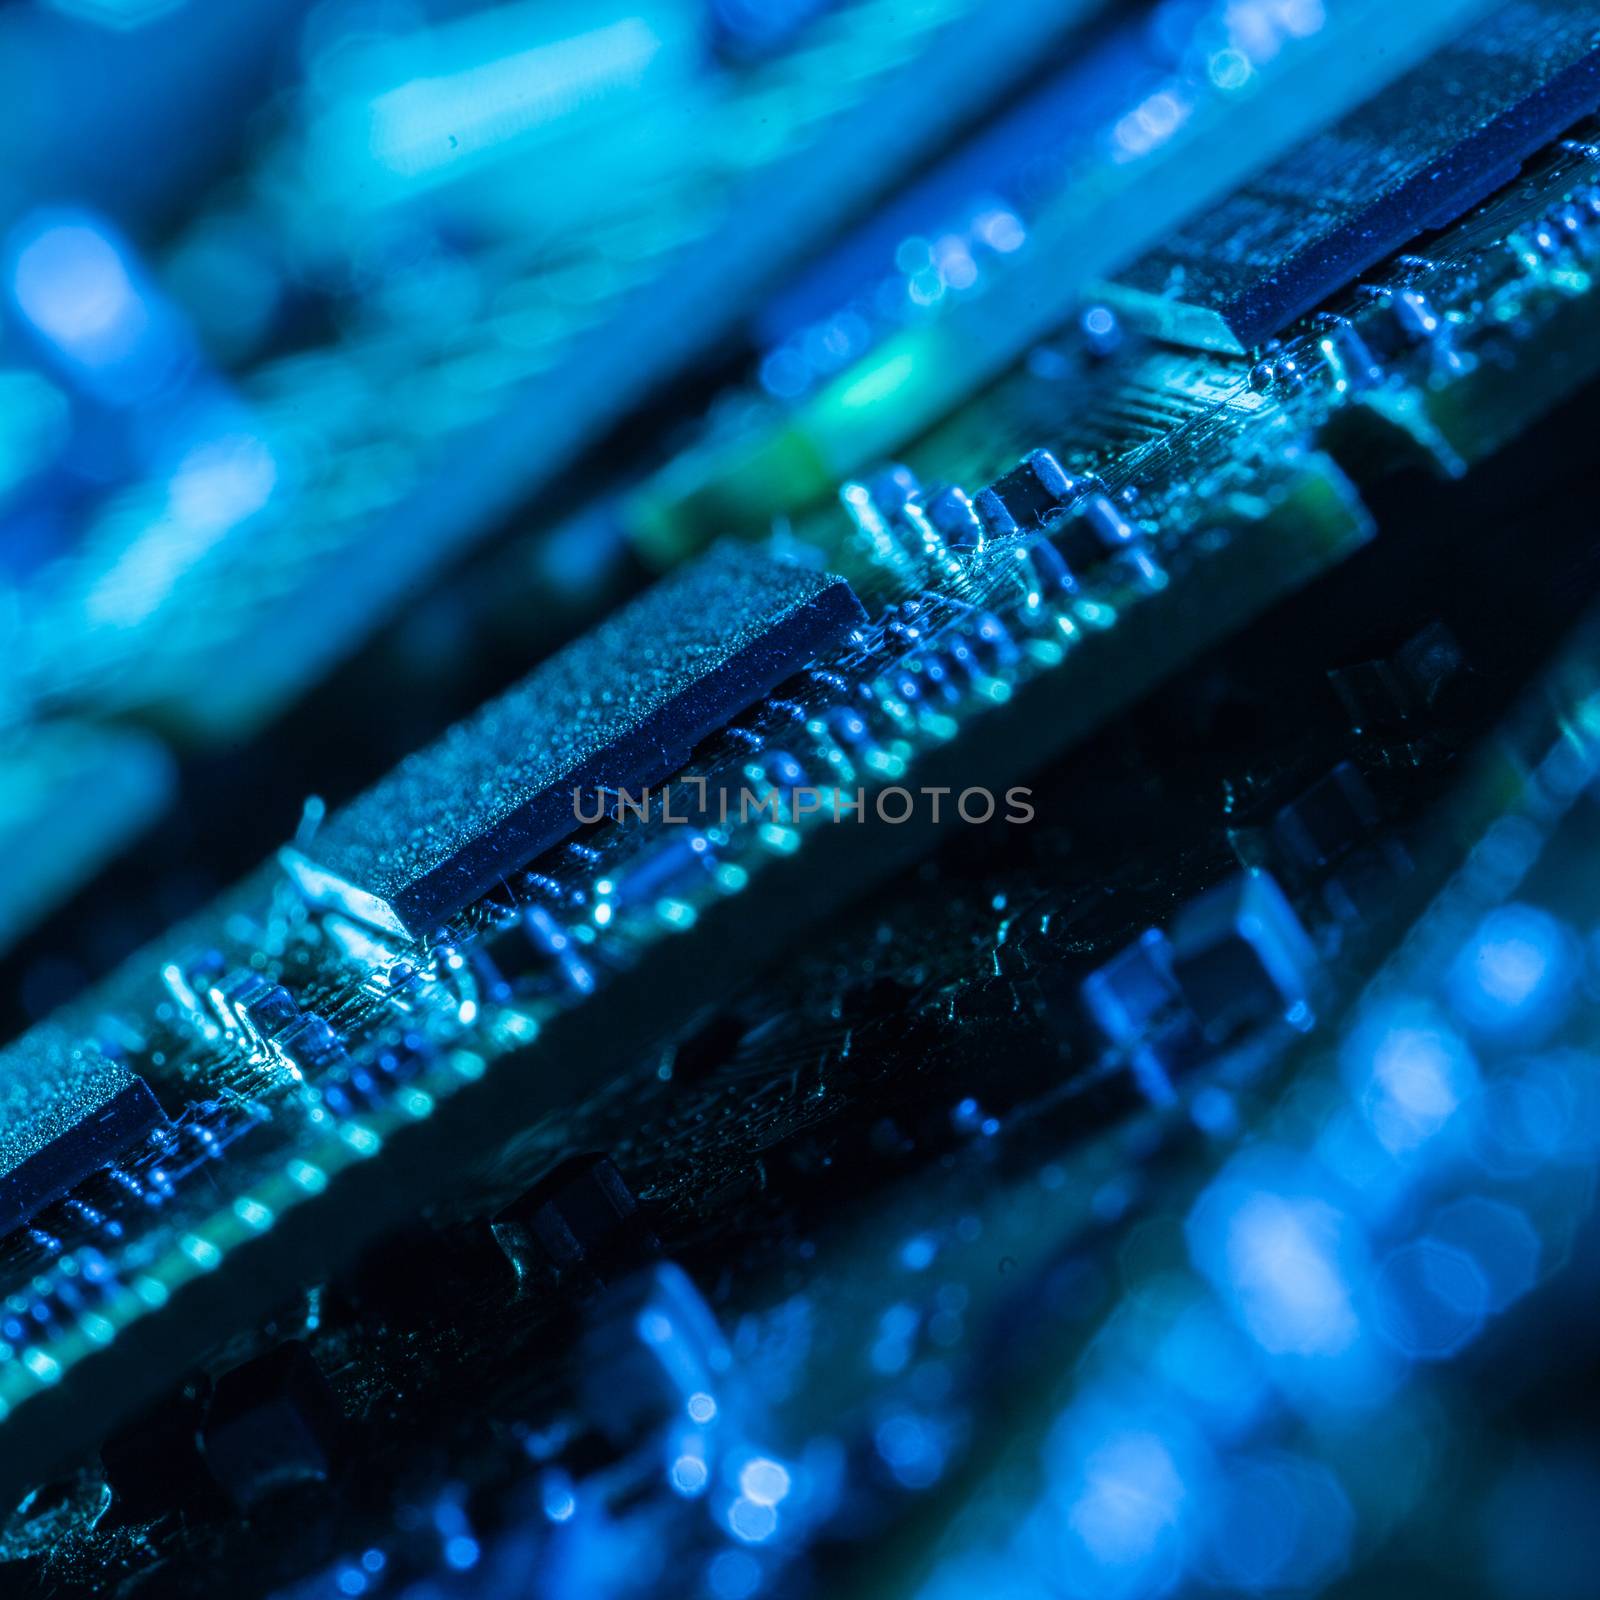 Closeup picture of some computer parts in blue light